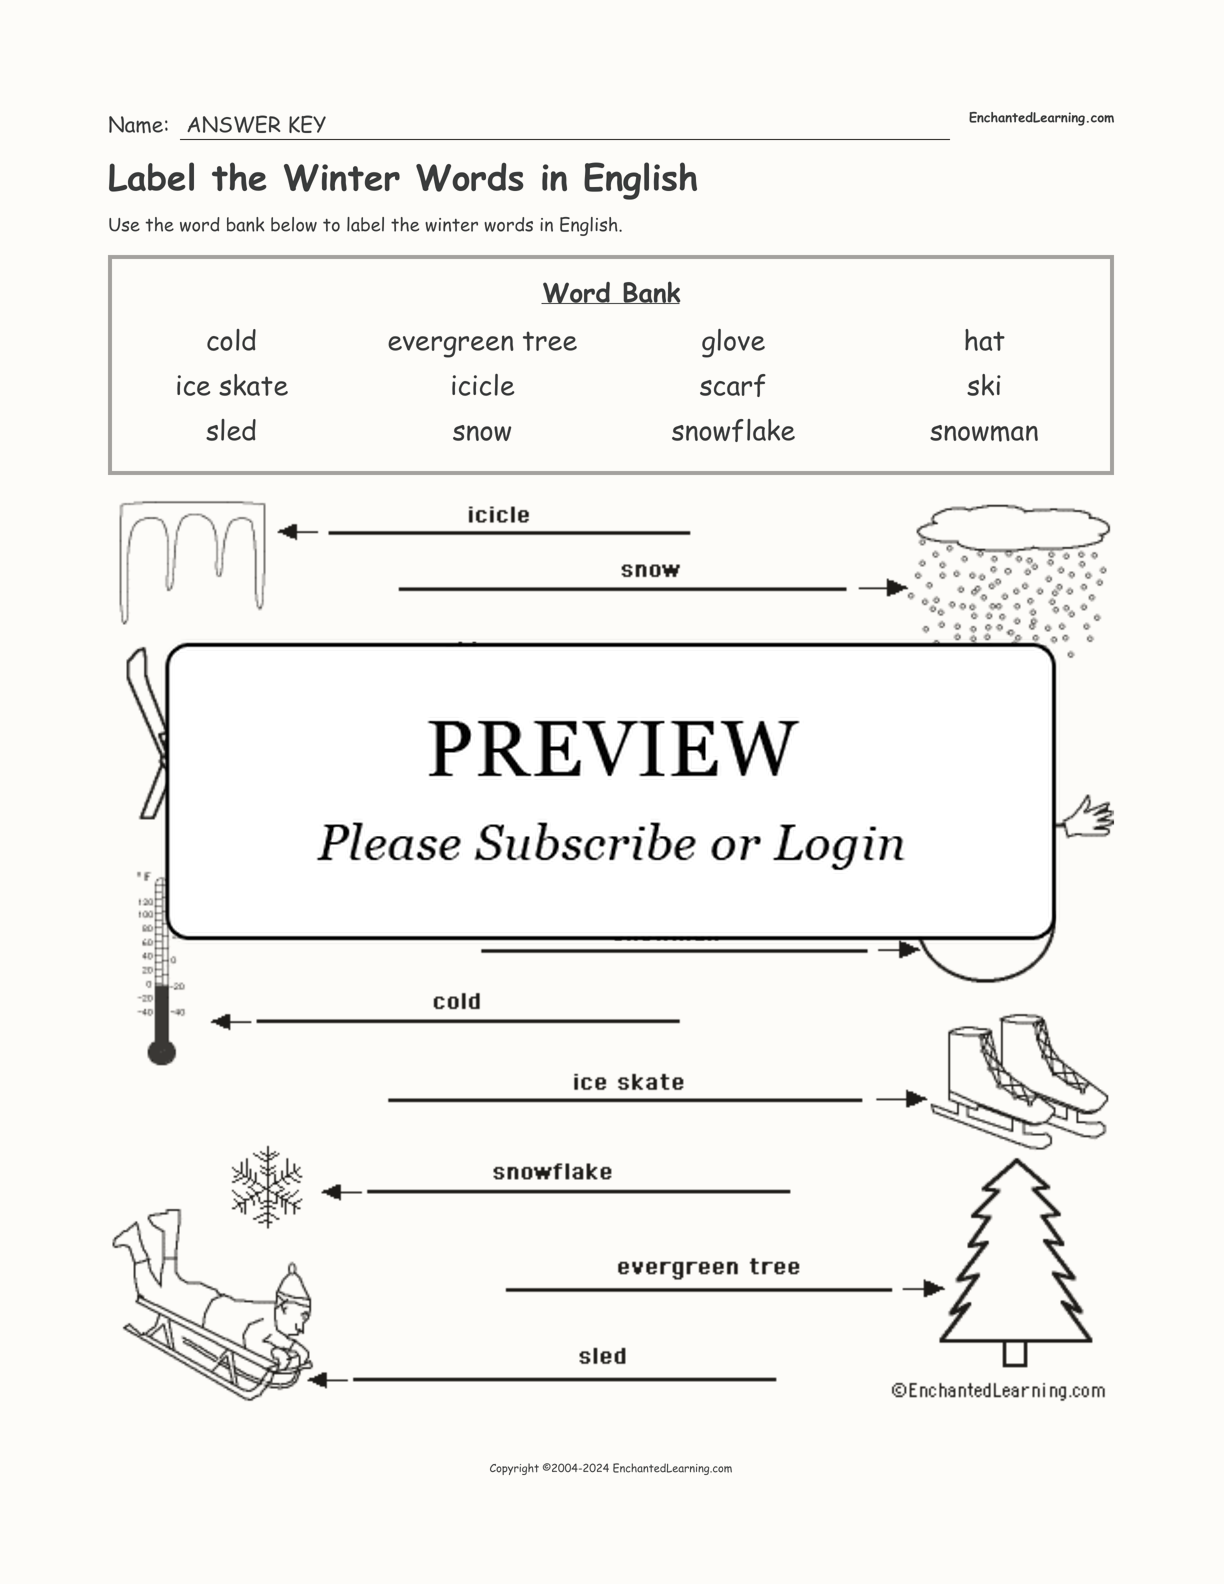 Label the Winter Words in English interactive worksheet page 2